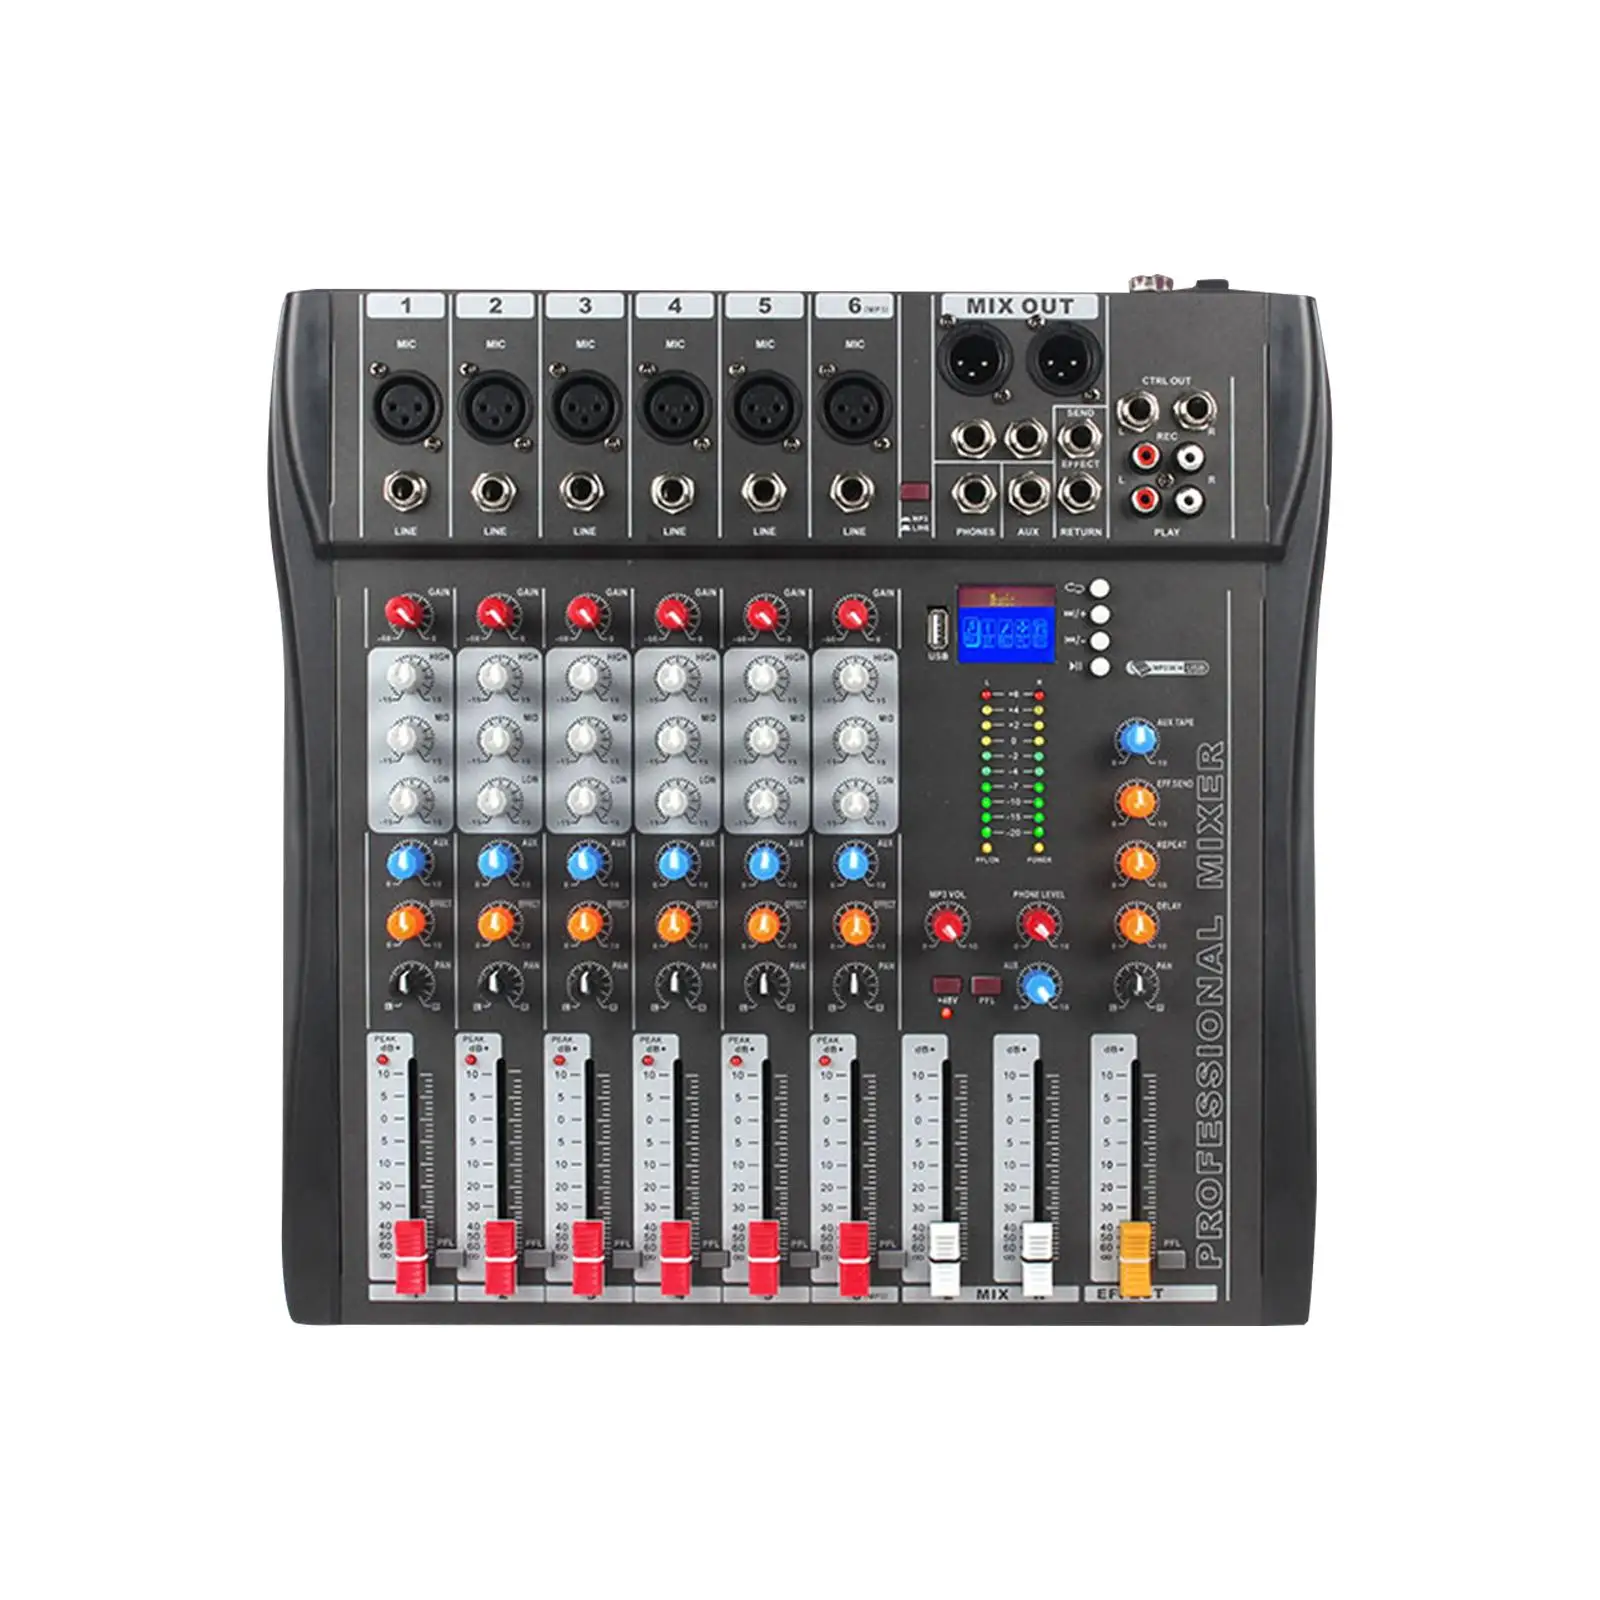 6 Channel Audio Mixer Sound Mixing Console US Adapter for Live Studio Stereo Impact Resistant Housing 48V Phantom Power Portable